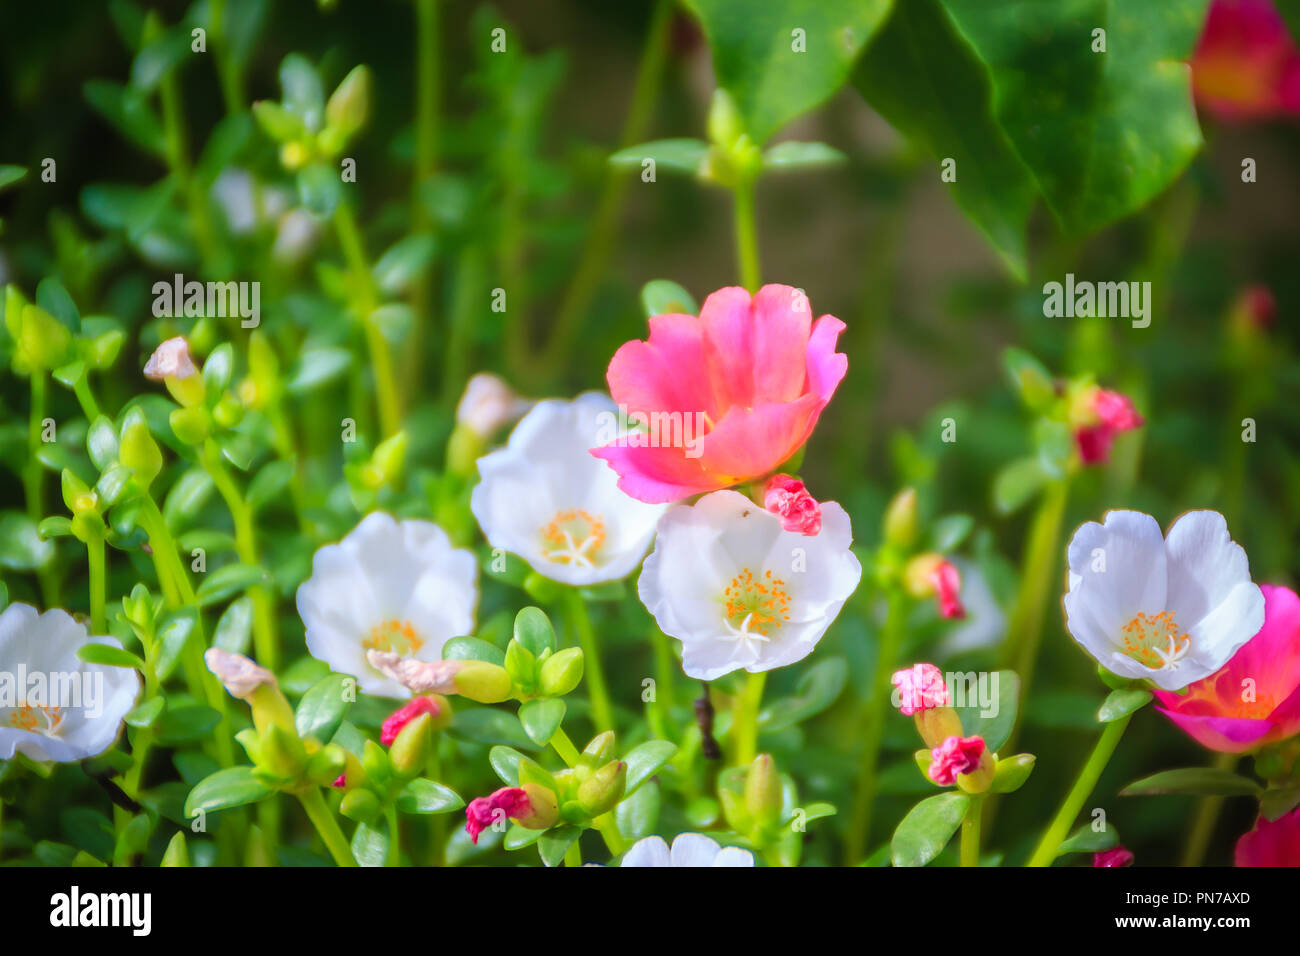 Beautiful white portulaca oleracea flower, also known as common purslane, verdolaga, little hogweed, red root, or pursley. Stock Photo